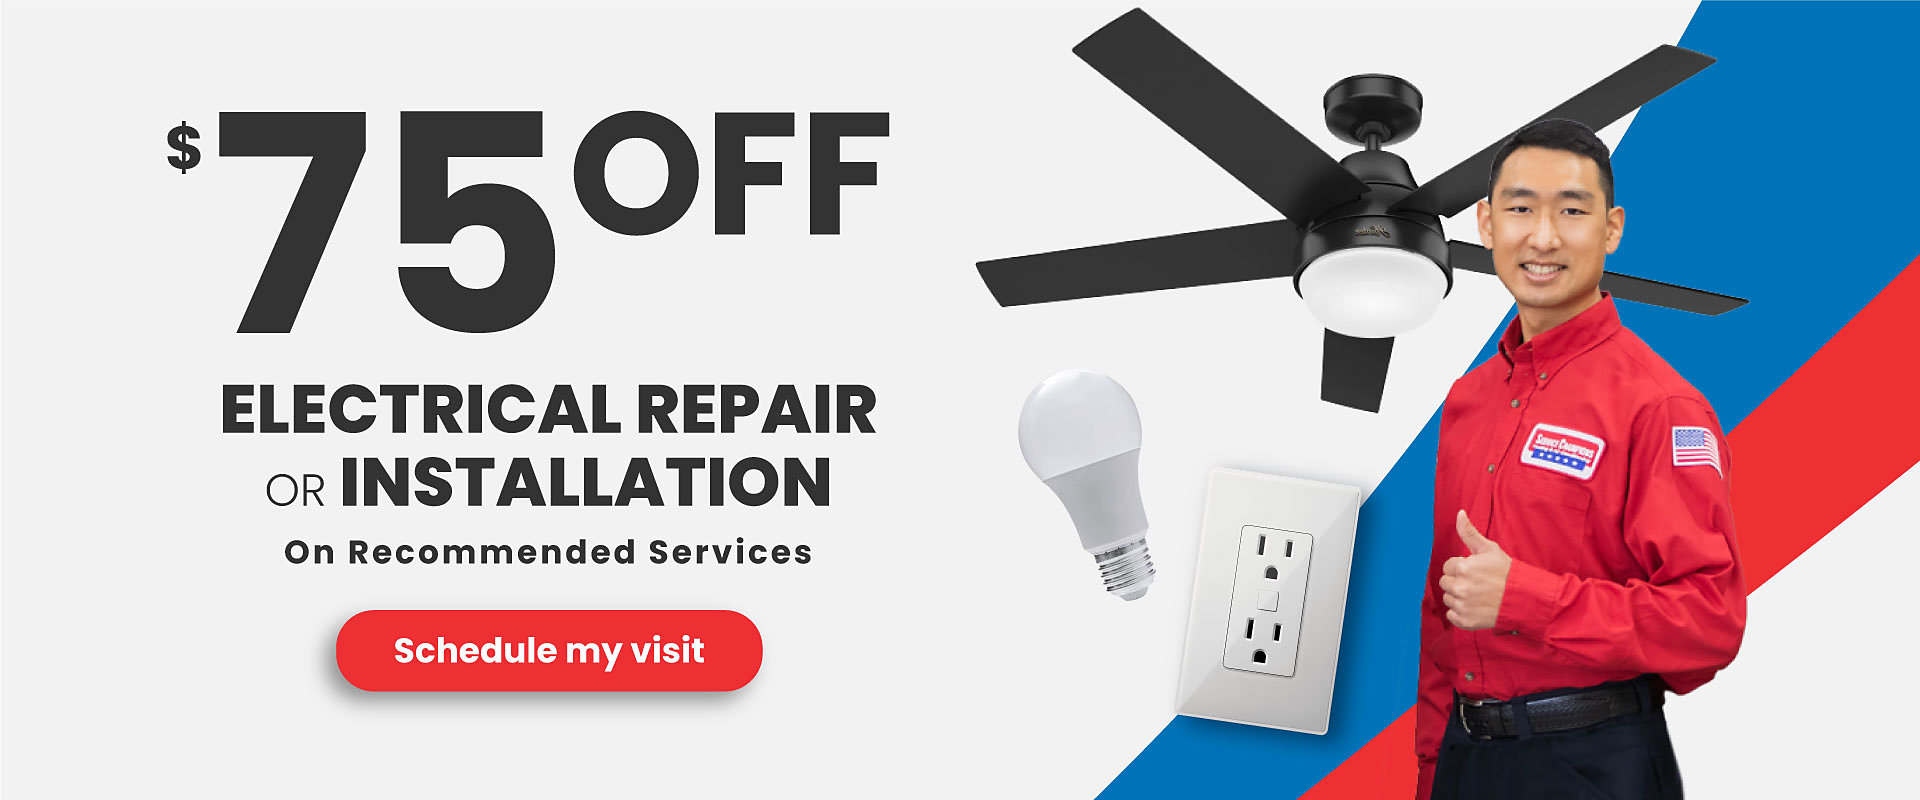 $75 OFF Electrical Repair or Installation